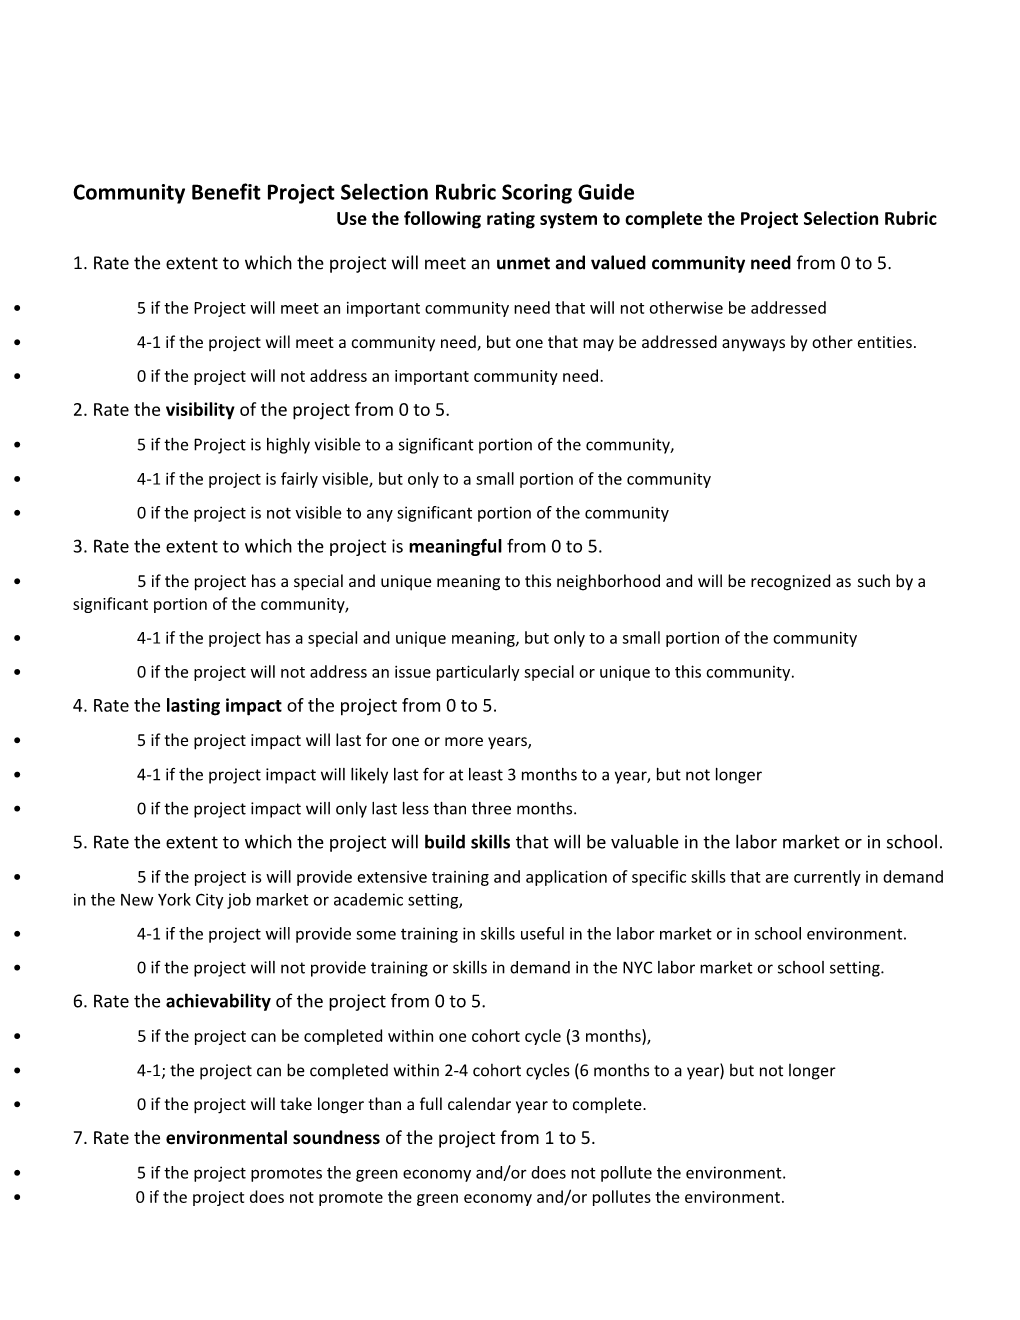 Community Benefit Project Selection Rubric Scoring Guide